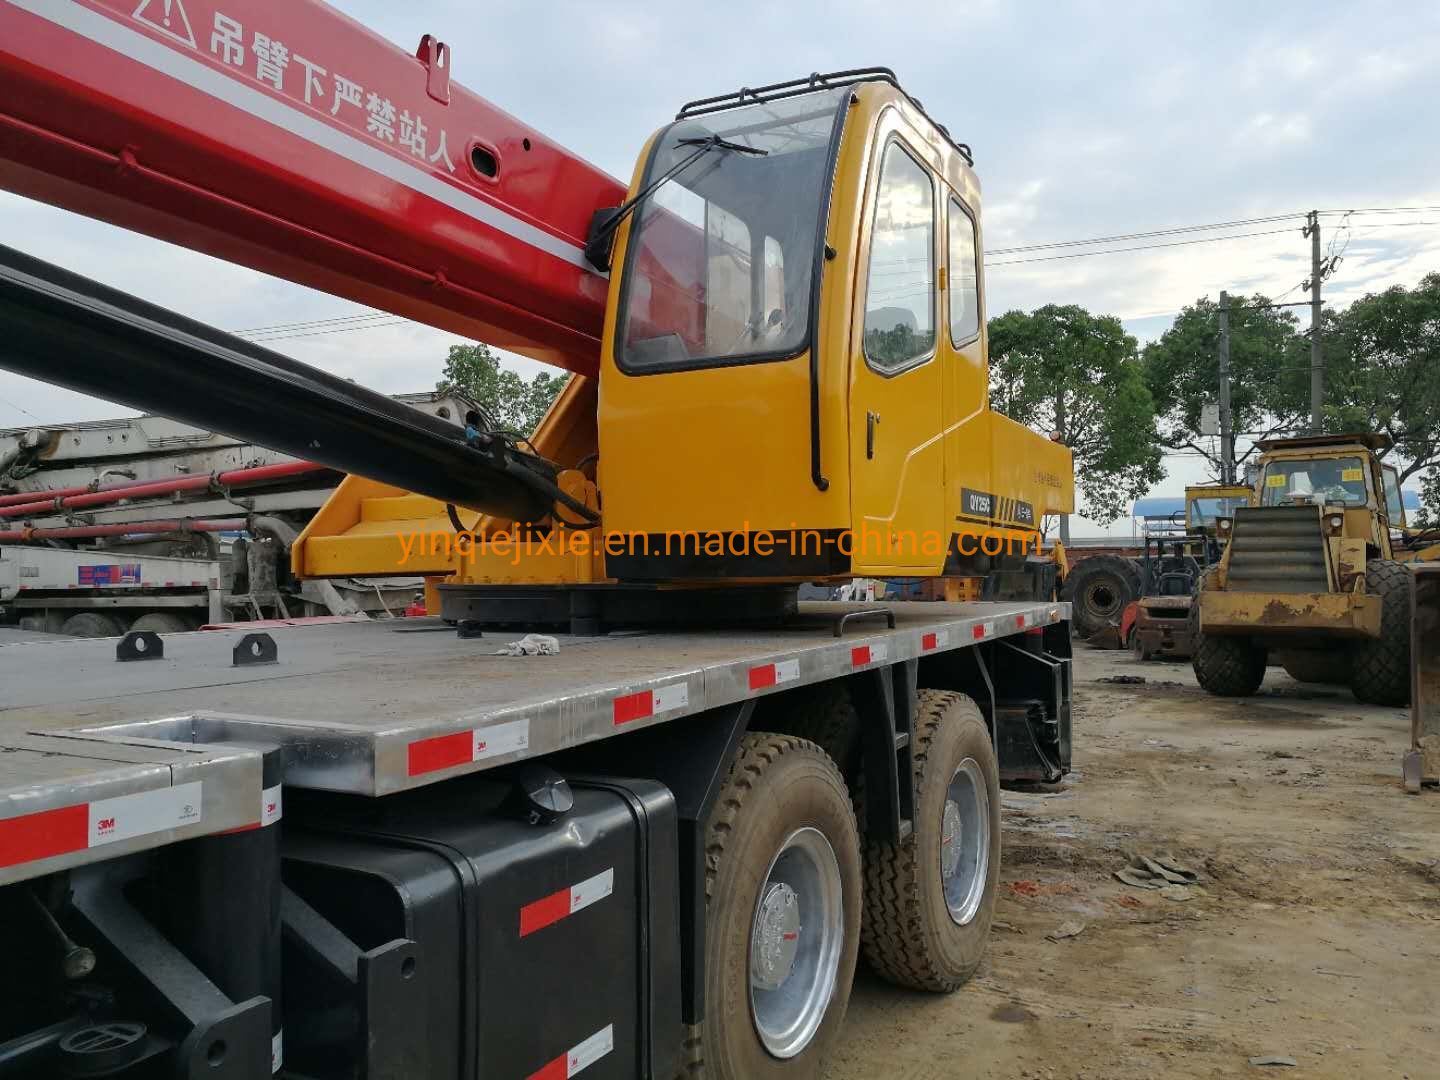 Used Sany Qy25c Mobile Crane Used 25t Truck Crane, Qy25c, Qy50c, Stc750, 25t, 50t, 75t Truck Crane for Sale